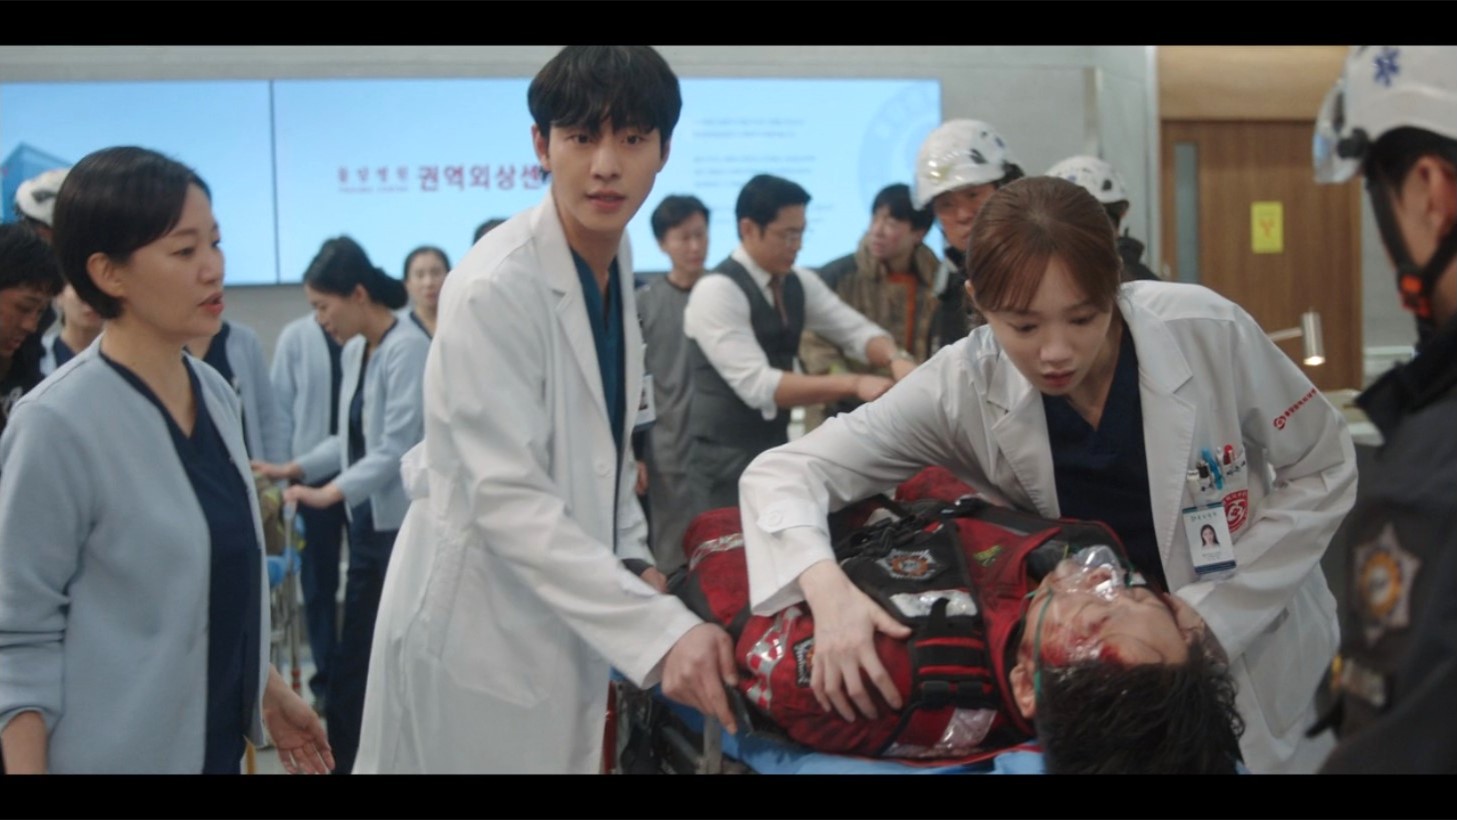 Lee Sung-kyung and Ahn Hyo-seop in Doctor Romantic Teacher Kim 3: Episodes 15-16 (Final)